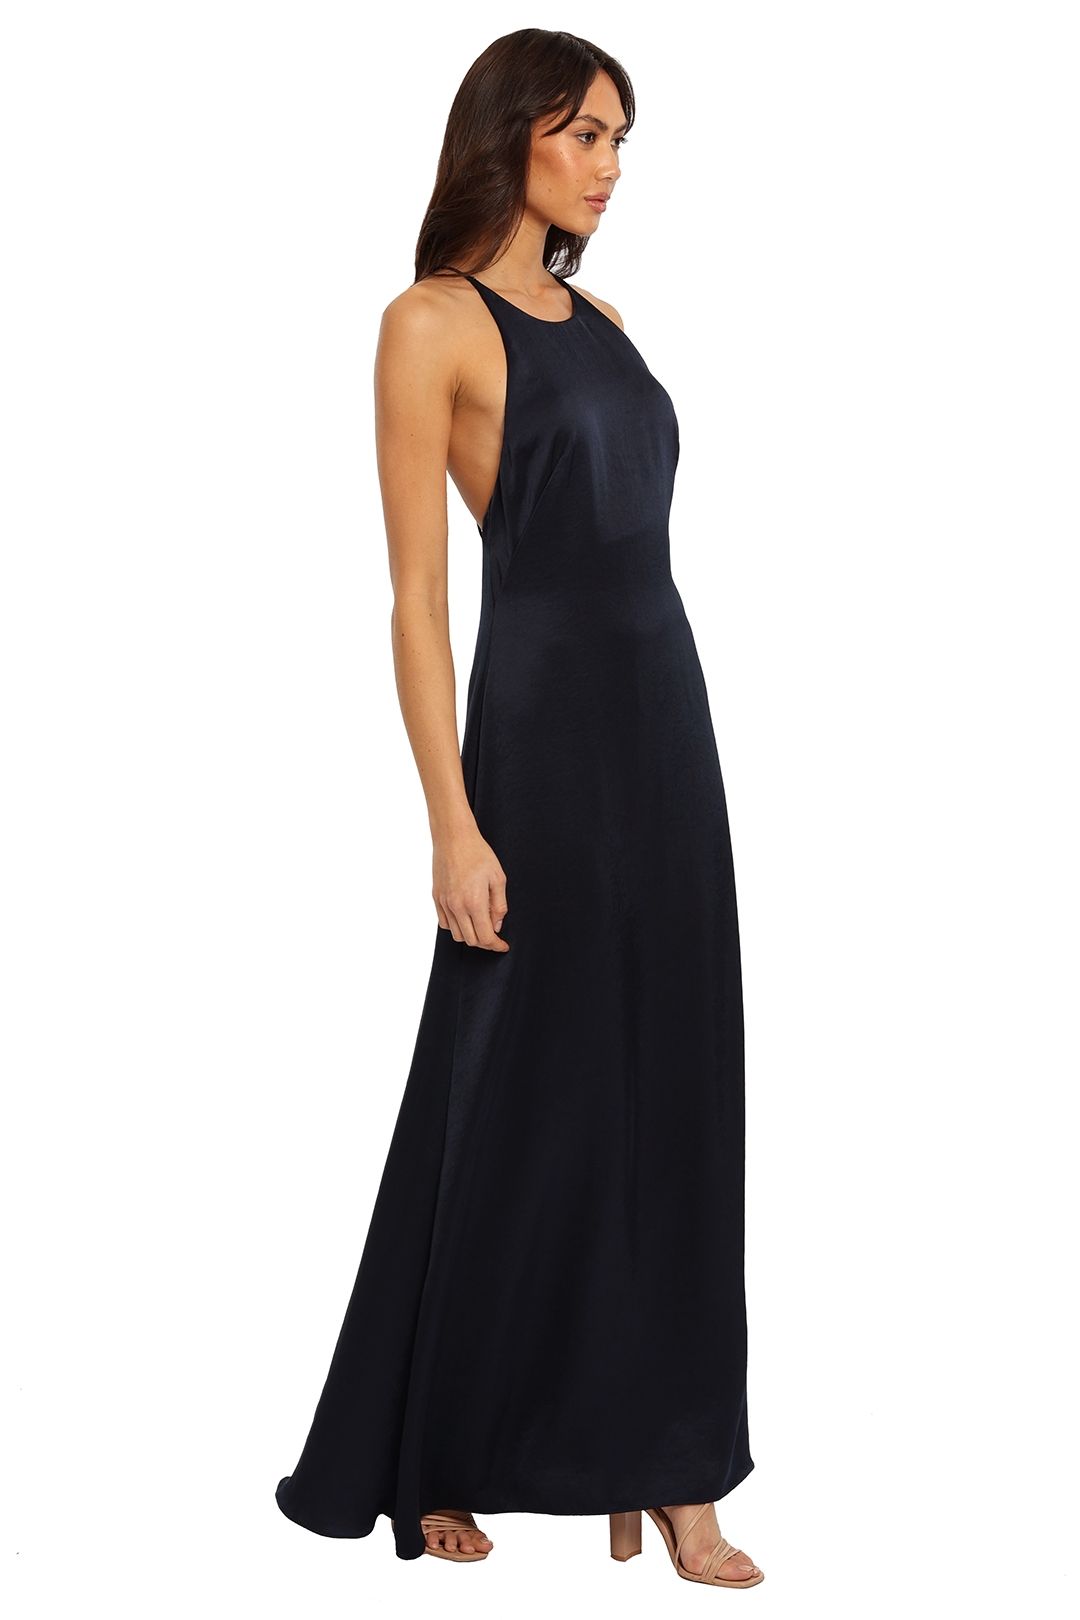 Camilla and Marc Garbo X Back Dress Navy